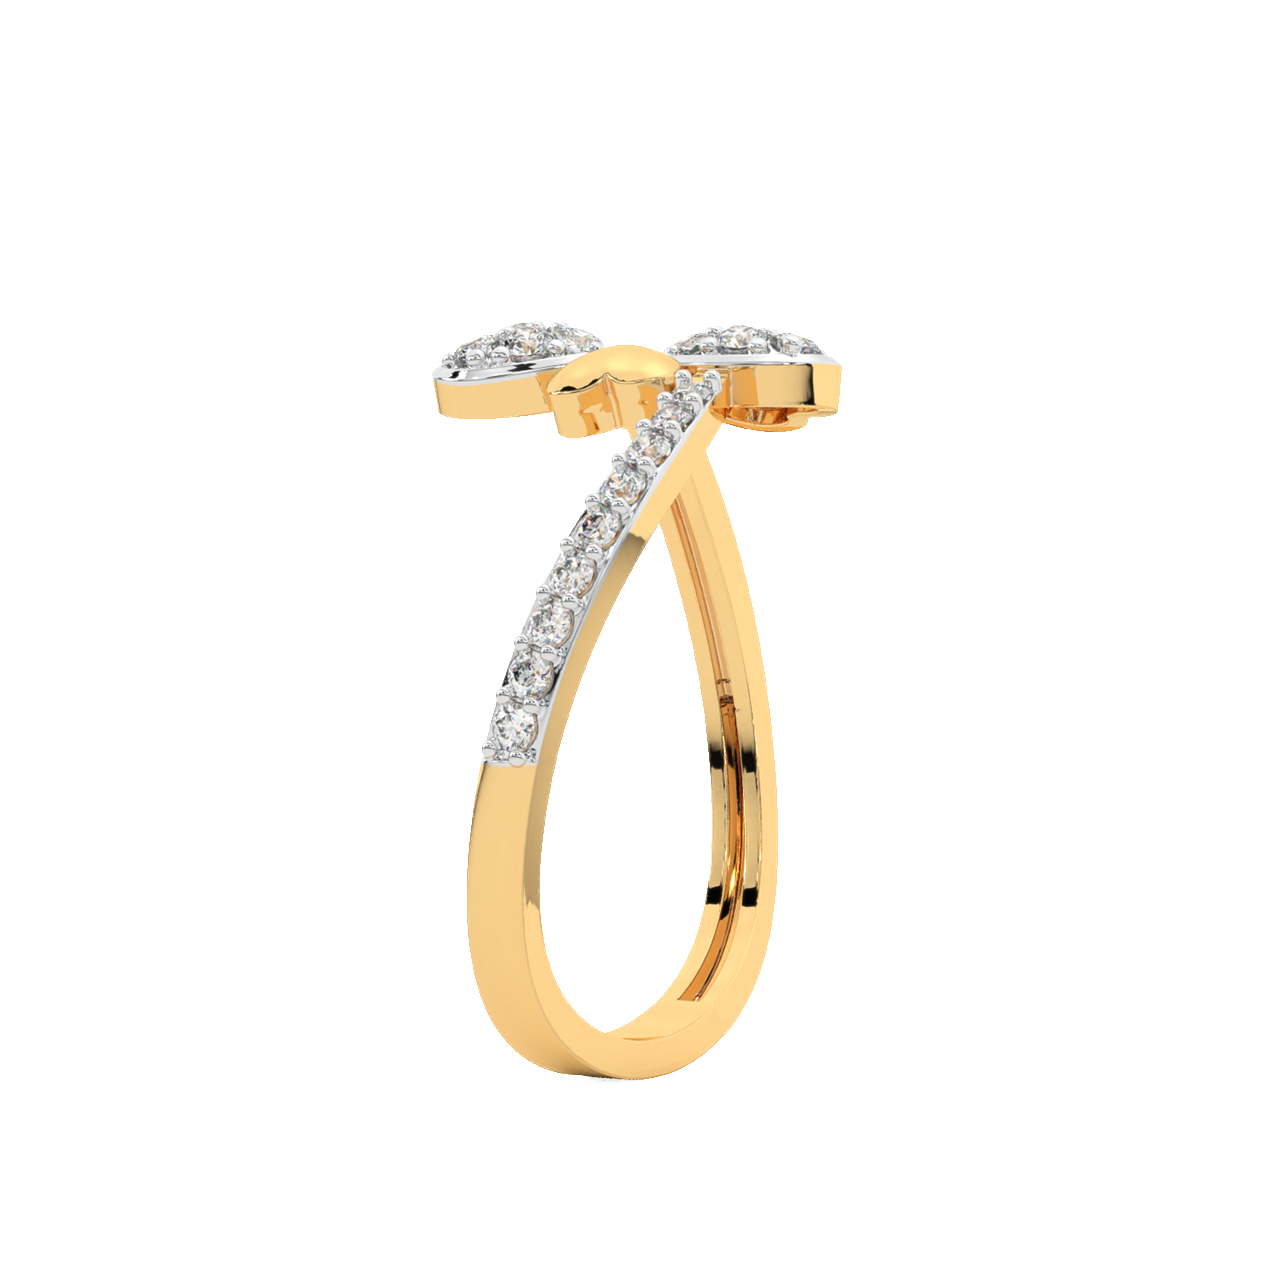 Unusual Diamond Ring | Perfect For Any Occasion